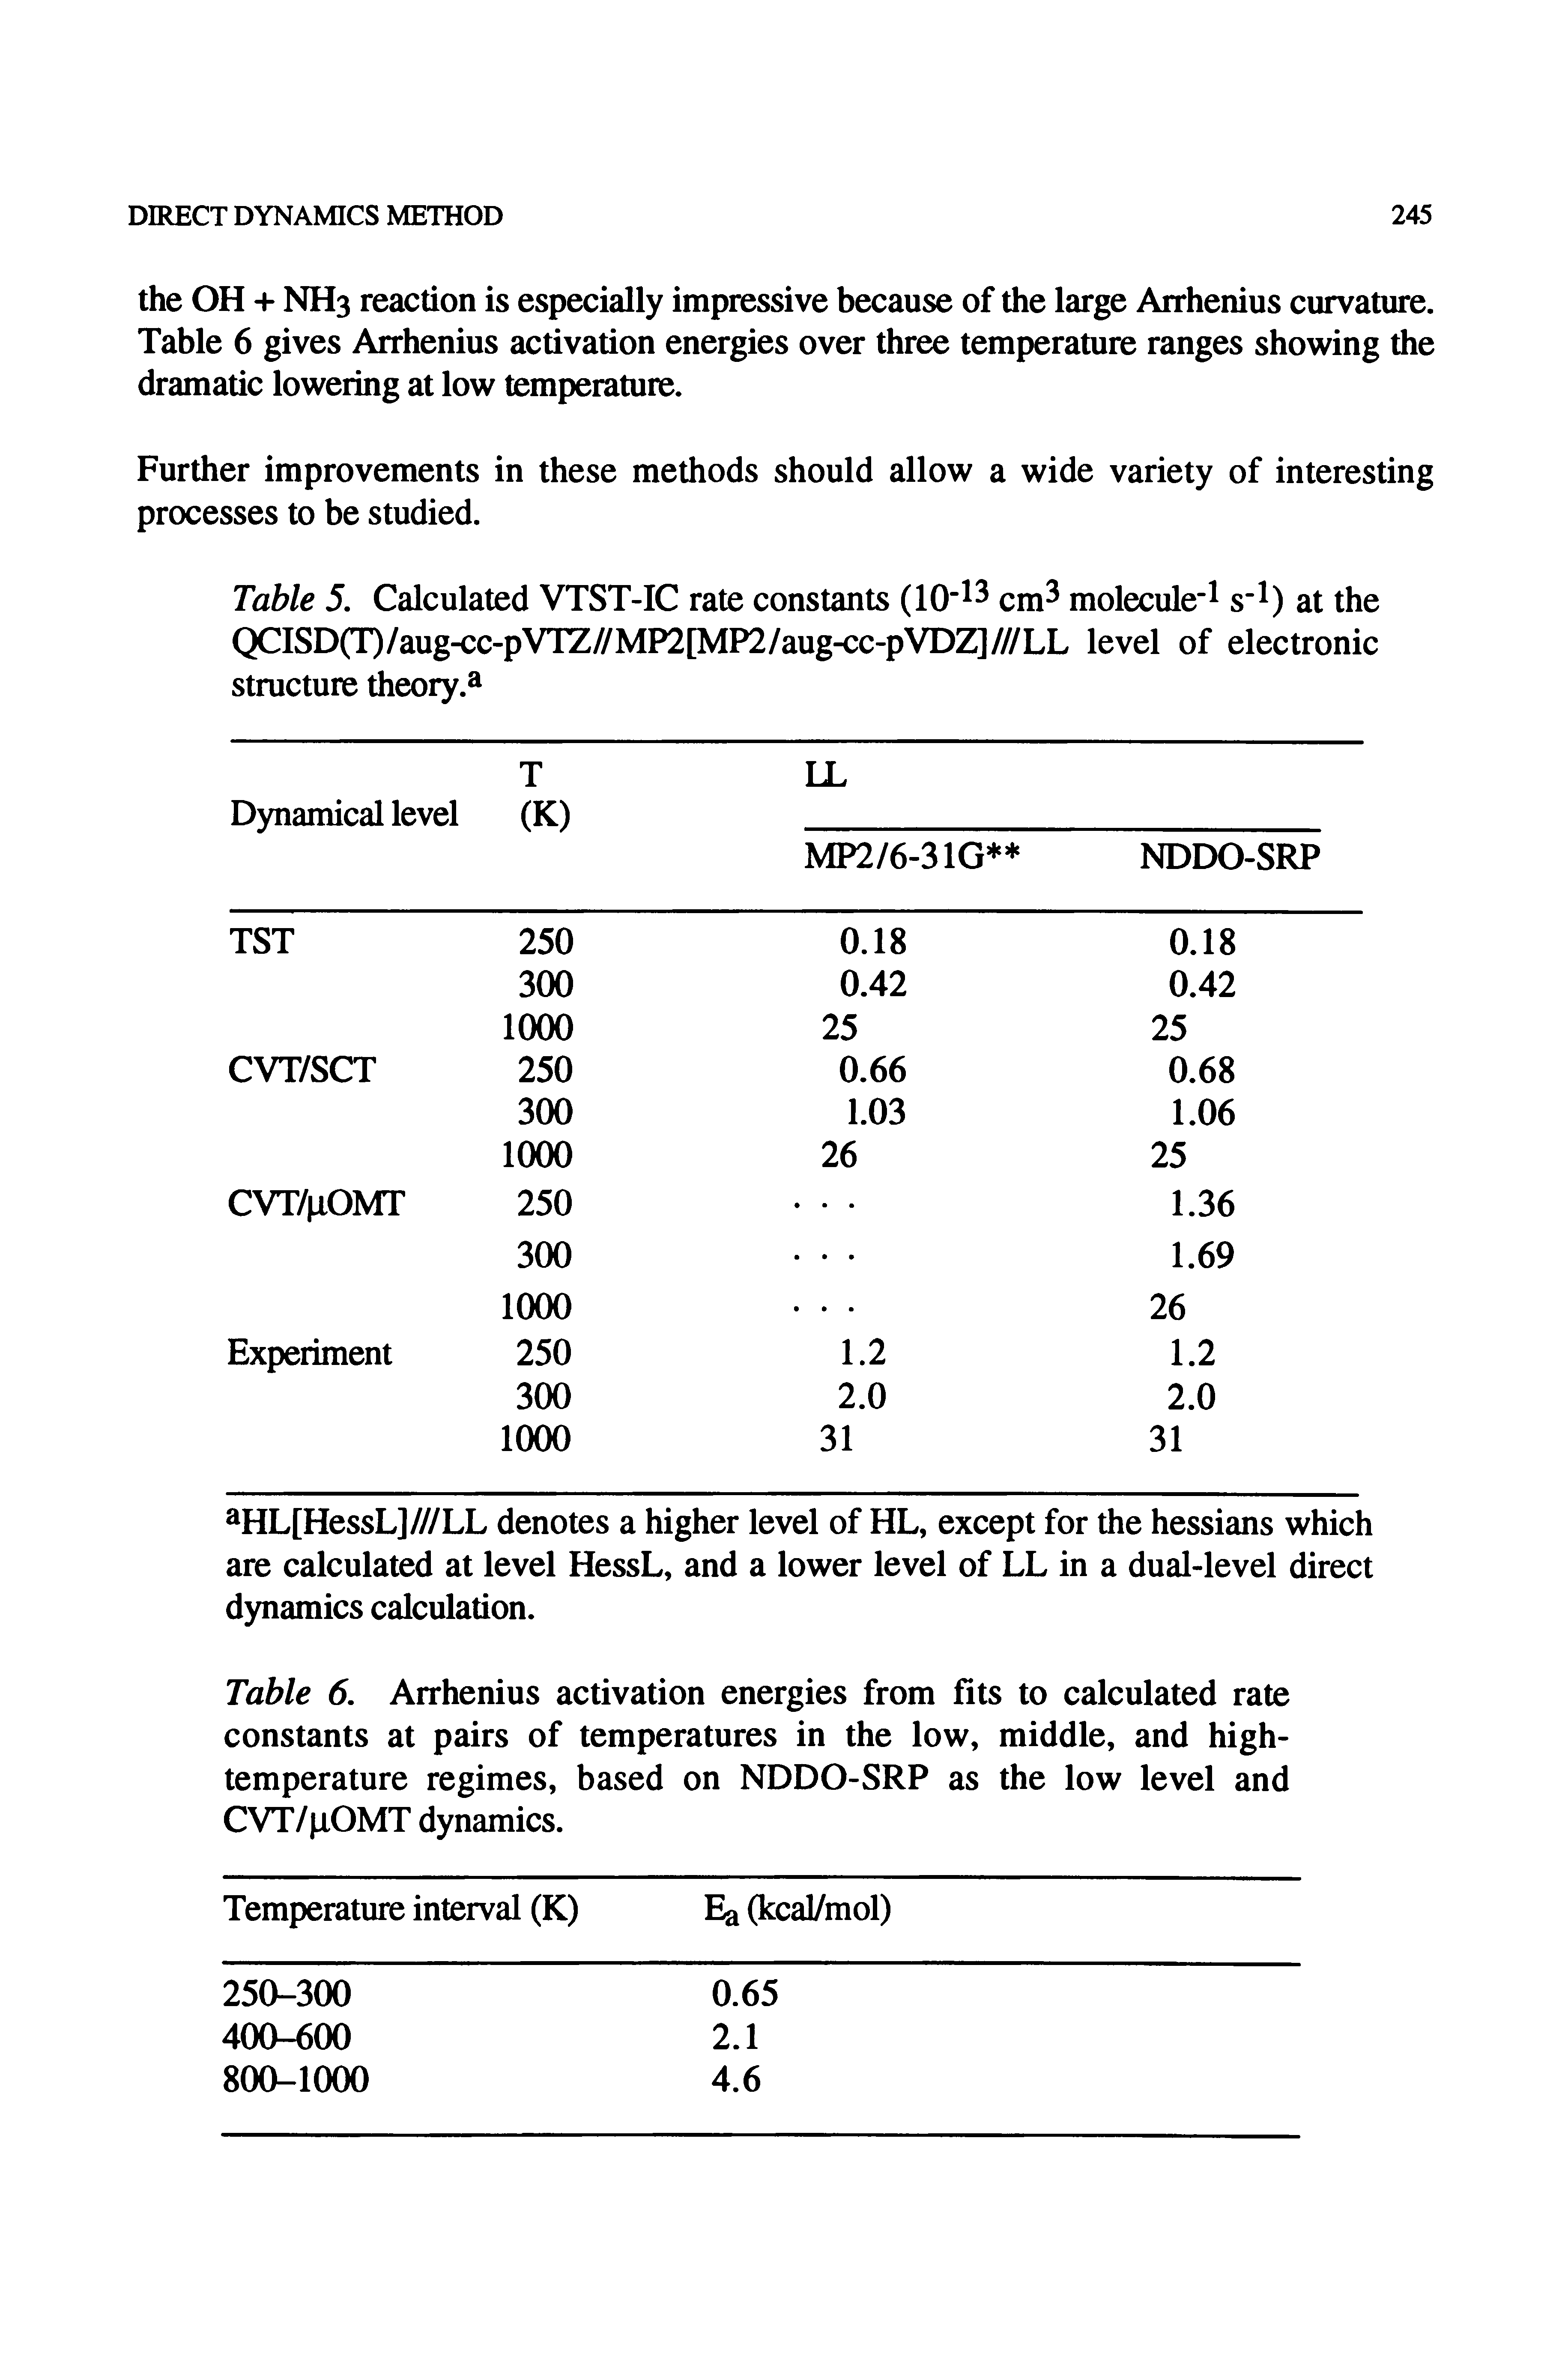 Table 6. Arrhenius activation energies from fits to calculated rate constants at pairs of temperatures in the low, middle, and high-temperature regimes, based on NDDO-SRP as the low level and CVT/pOMT dynamics.